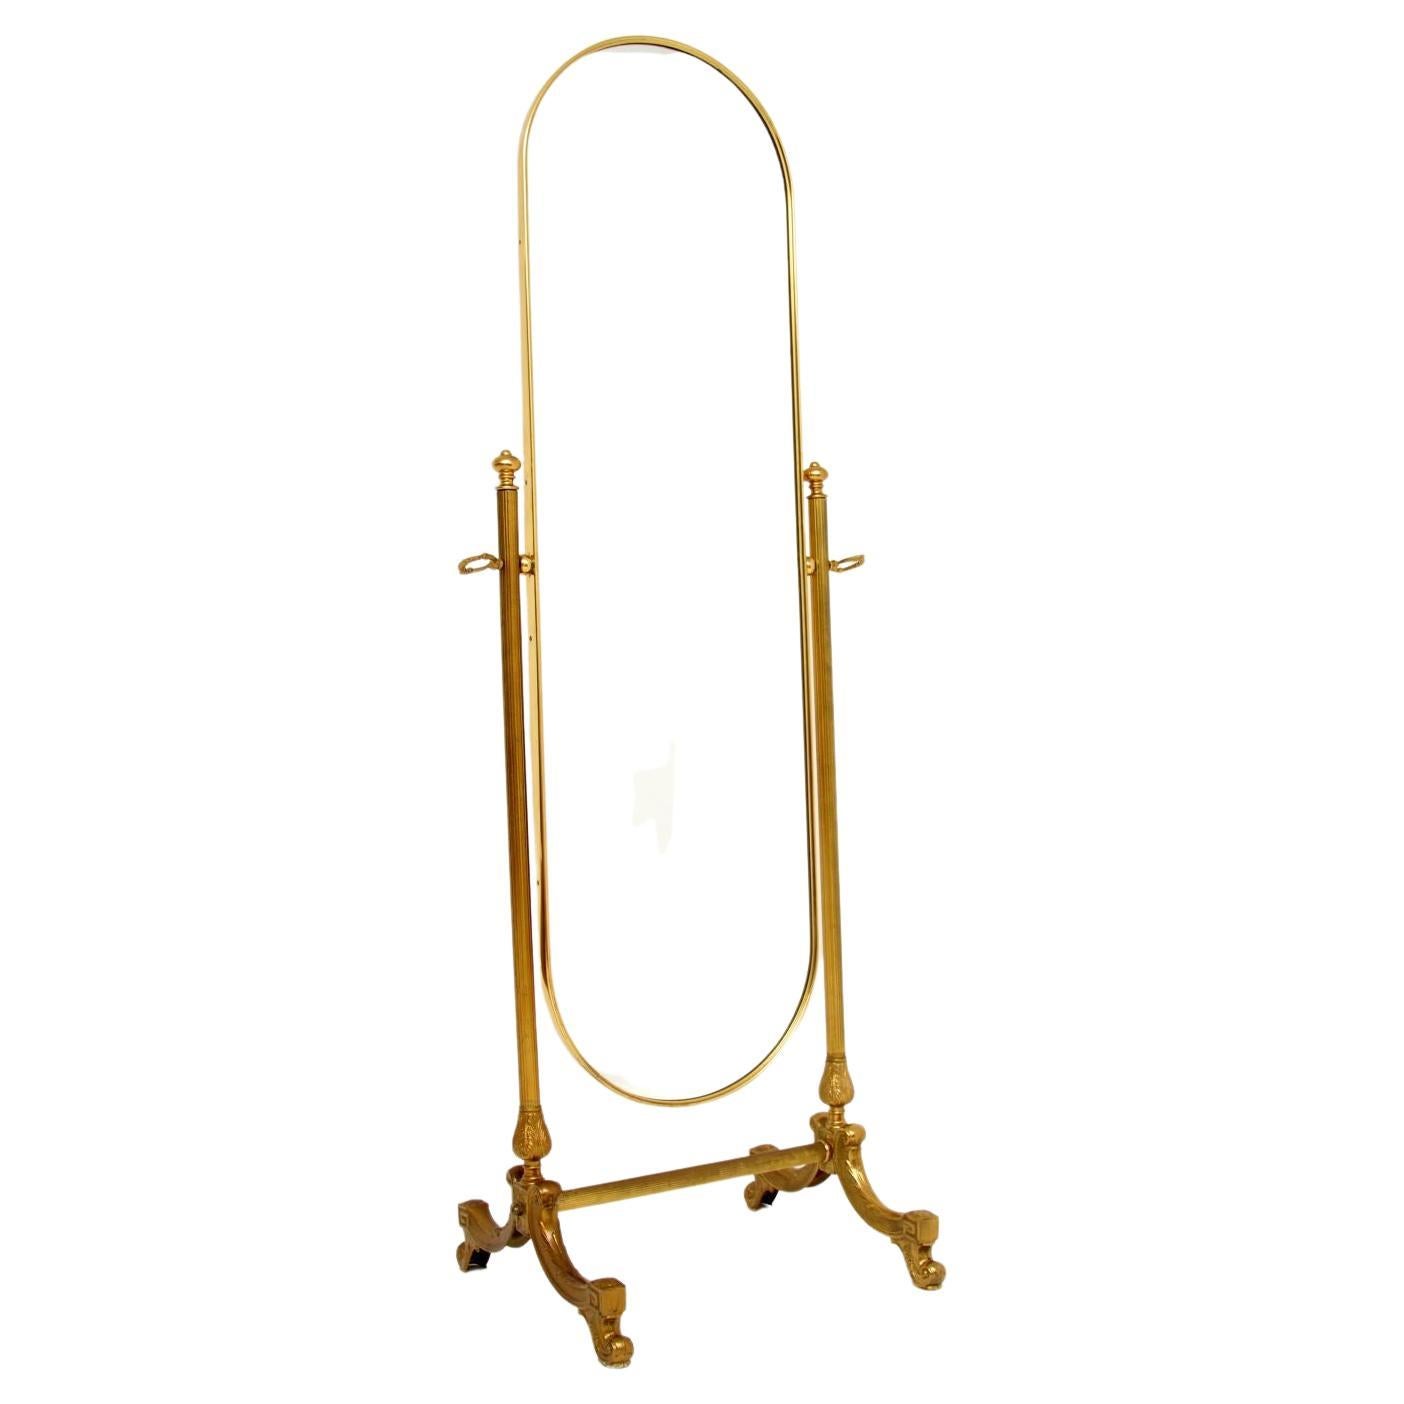 A beautiful and useful antique French cheval mirror in solid brass. This was made in France, it dates from around the 1950’s.

It is very well made and of amazing quality. The oval mirror can be tilted to different angles, this has wonderful